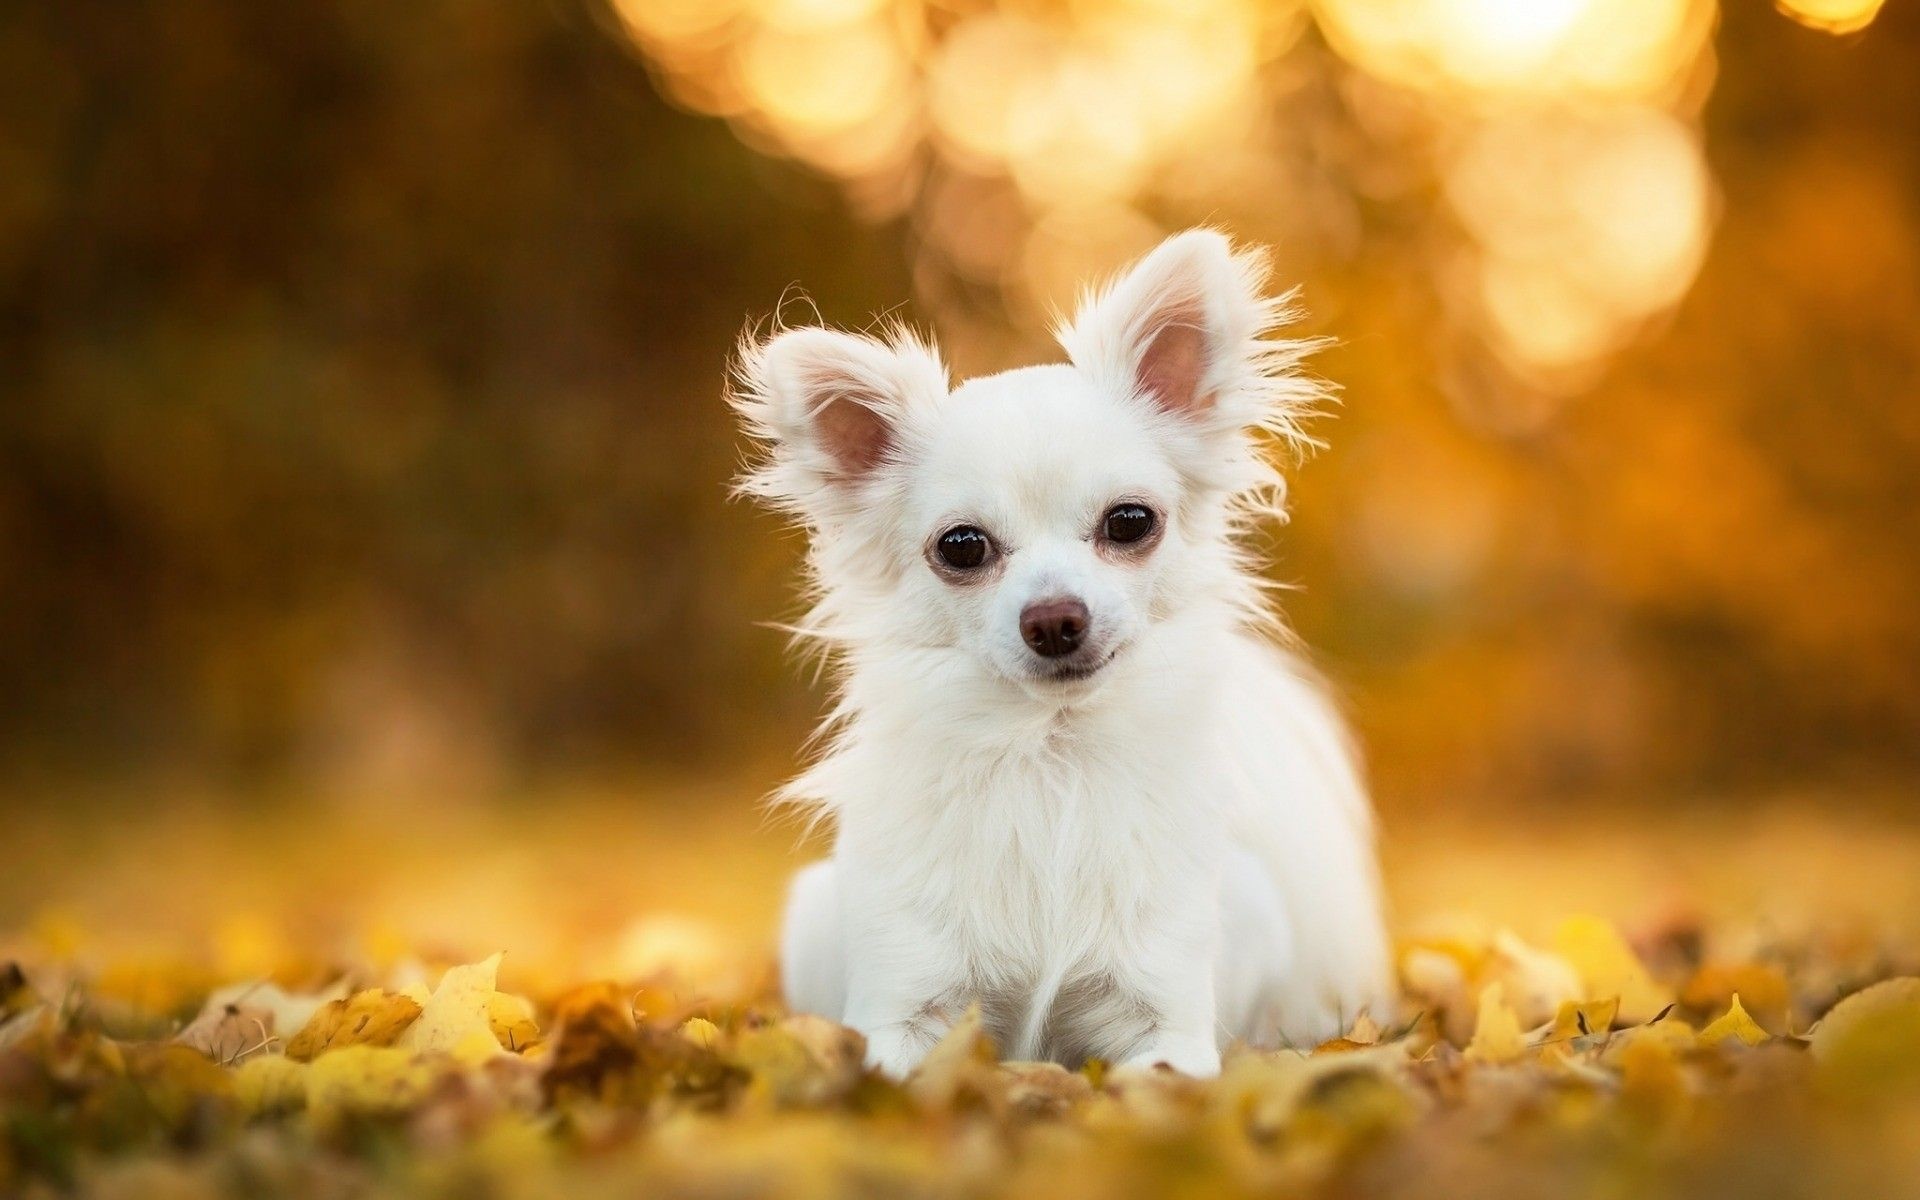 Chihuahua wallpapers in 4K, High-definition backgrounds, Stunning visuals, Adorable pet, 1920x1200 HD Desktop